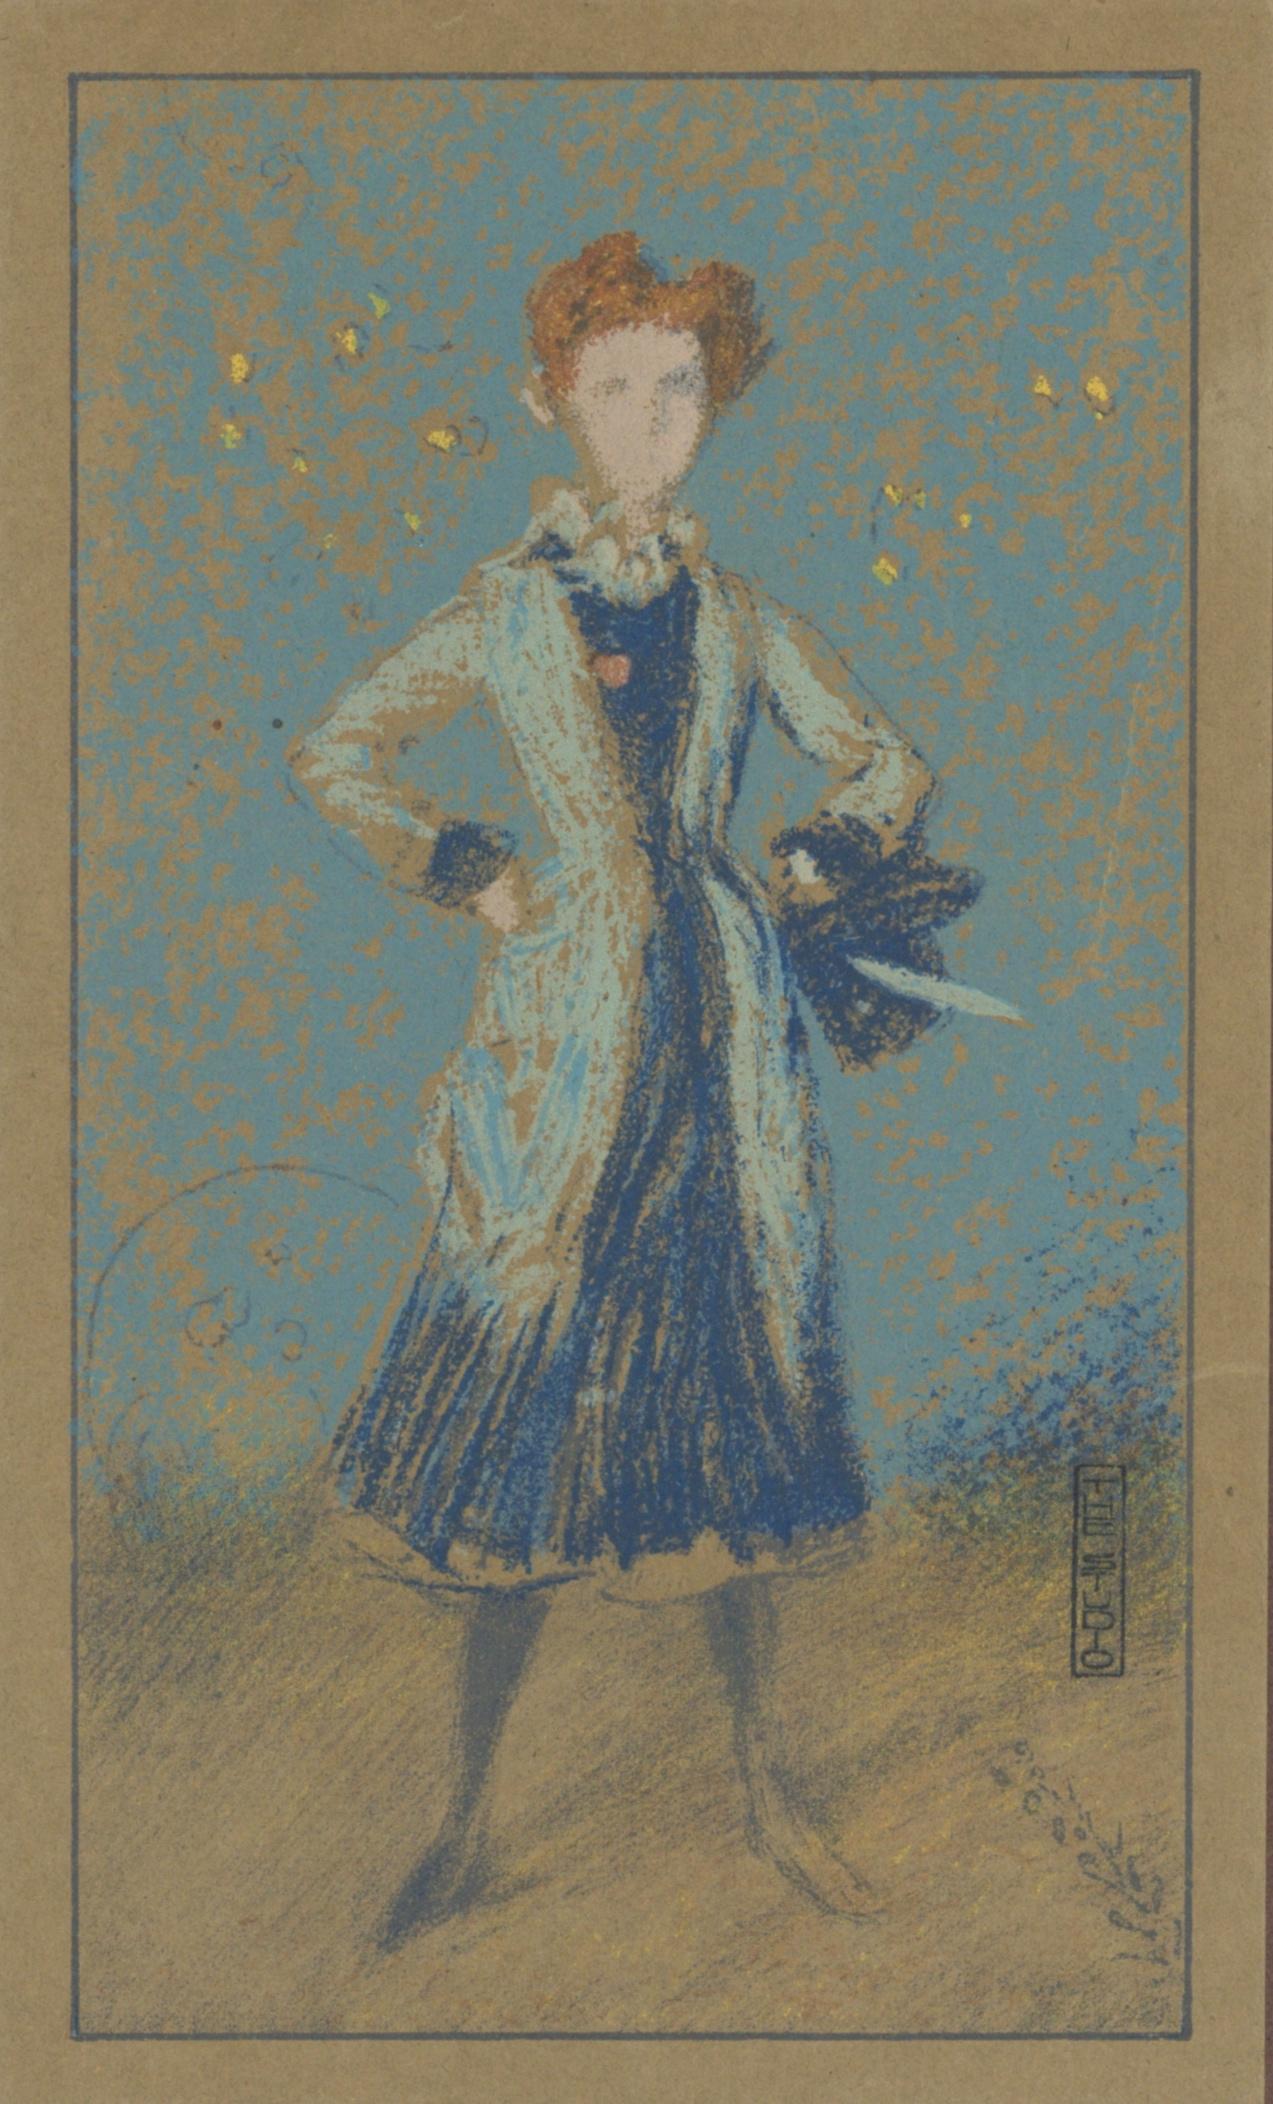 "The Blue Girl" lithograph 1905 - Print by (after) James Abbott McNeill Whistler